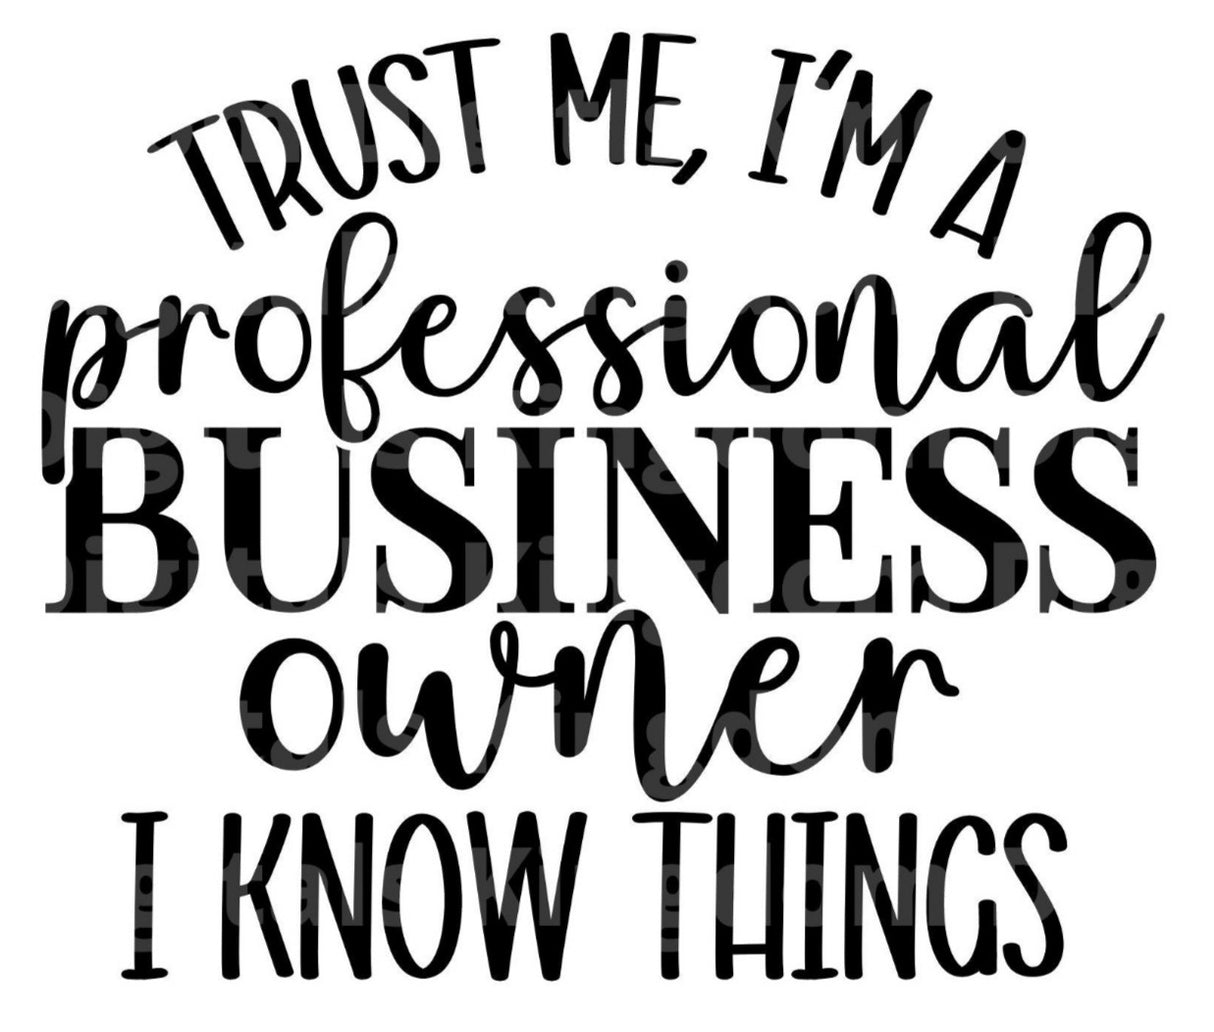 Trust Me Im A Professional Business Owner I Know Things SVG Cut File